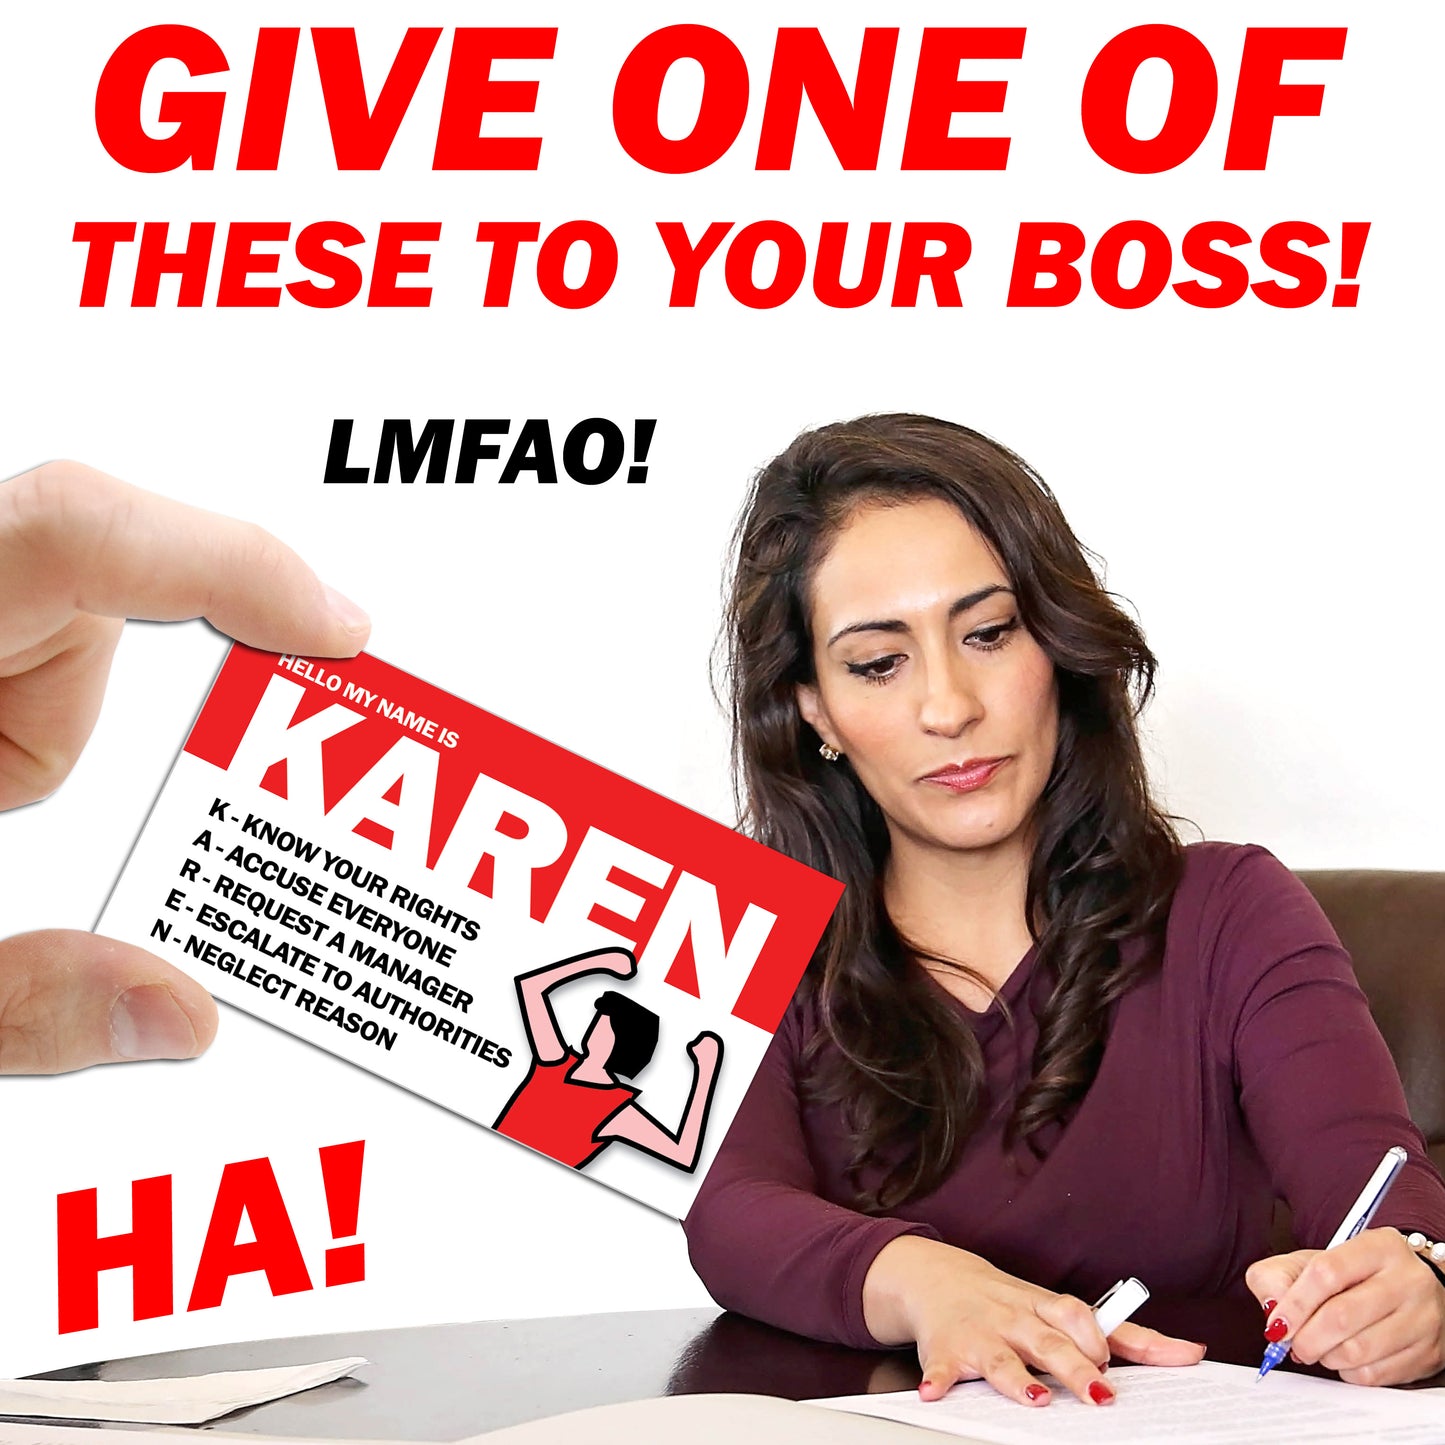 Hello My Name is Karen Cards 50 Pack